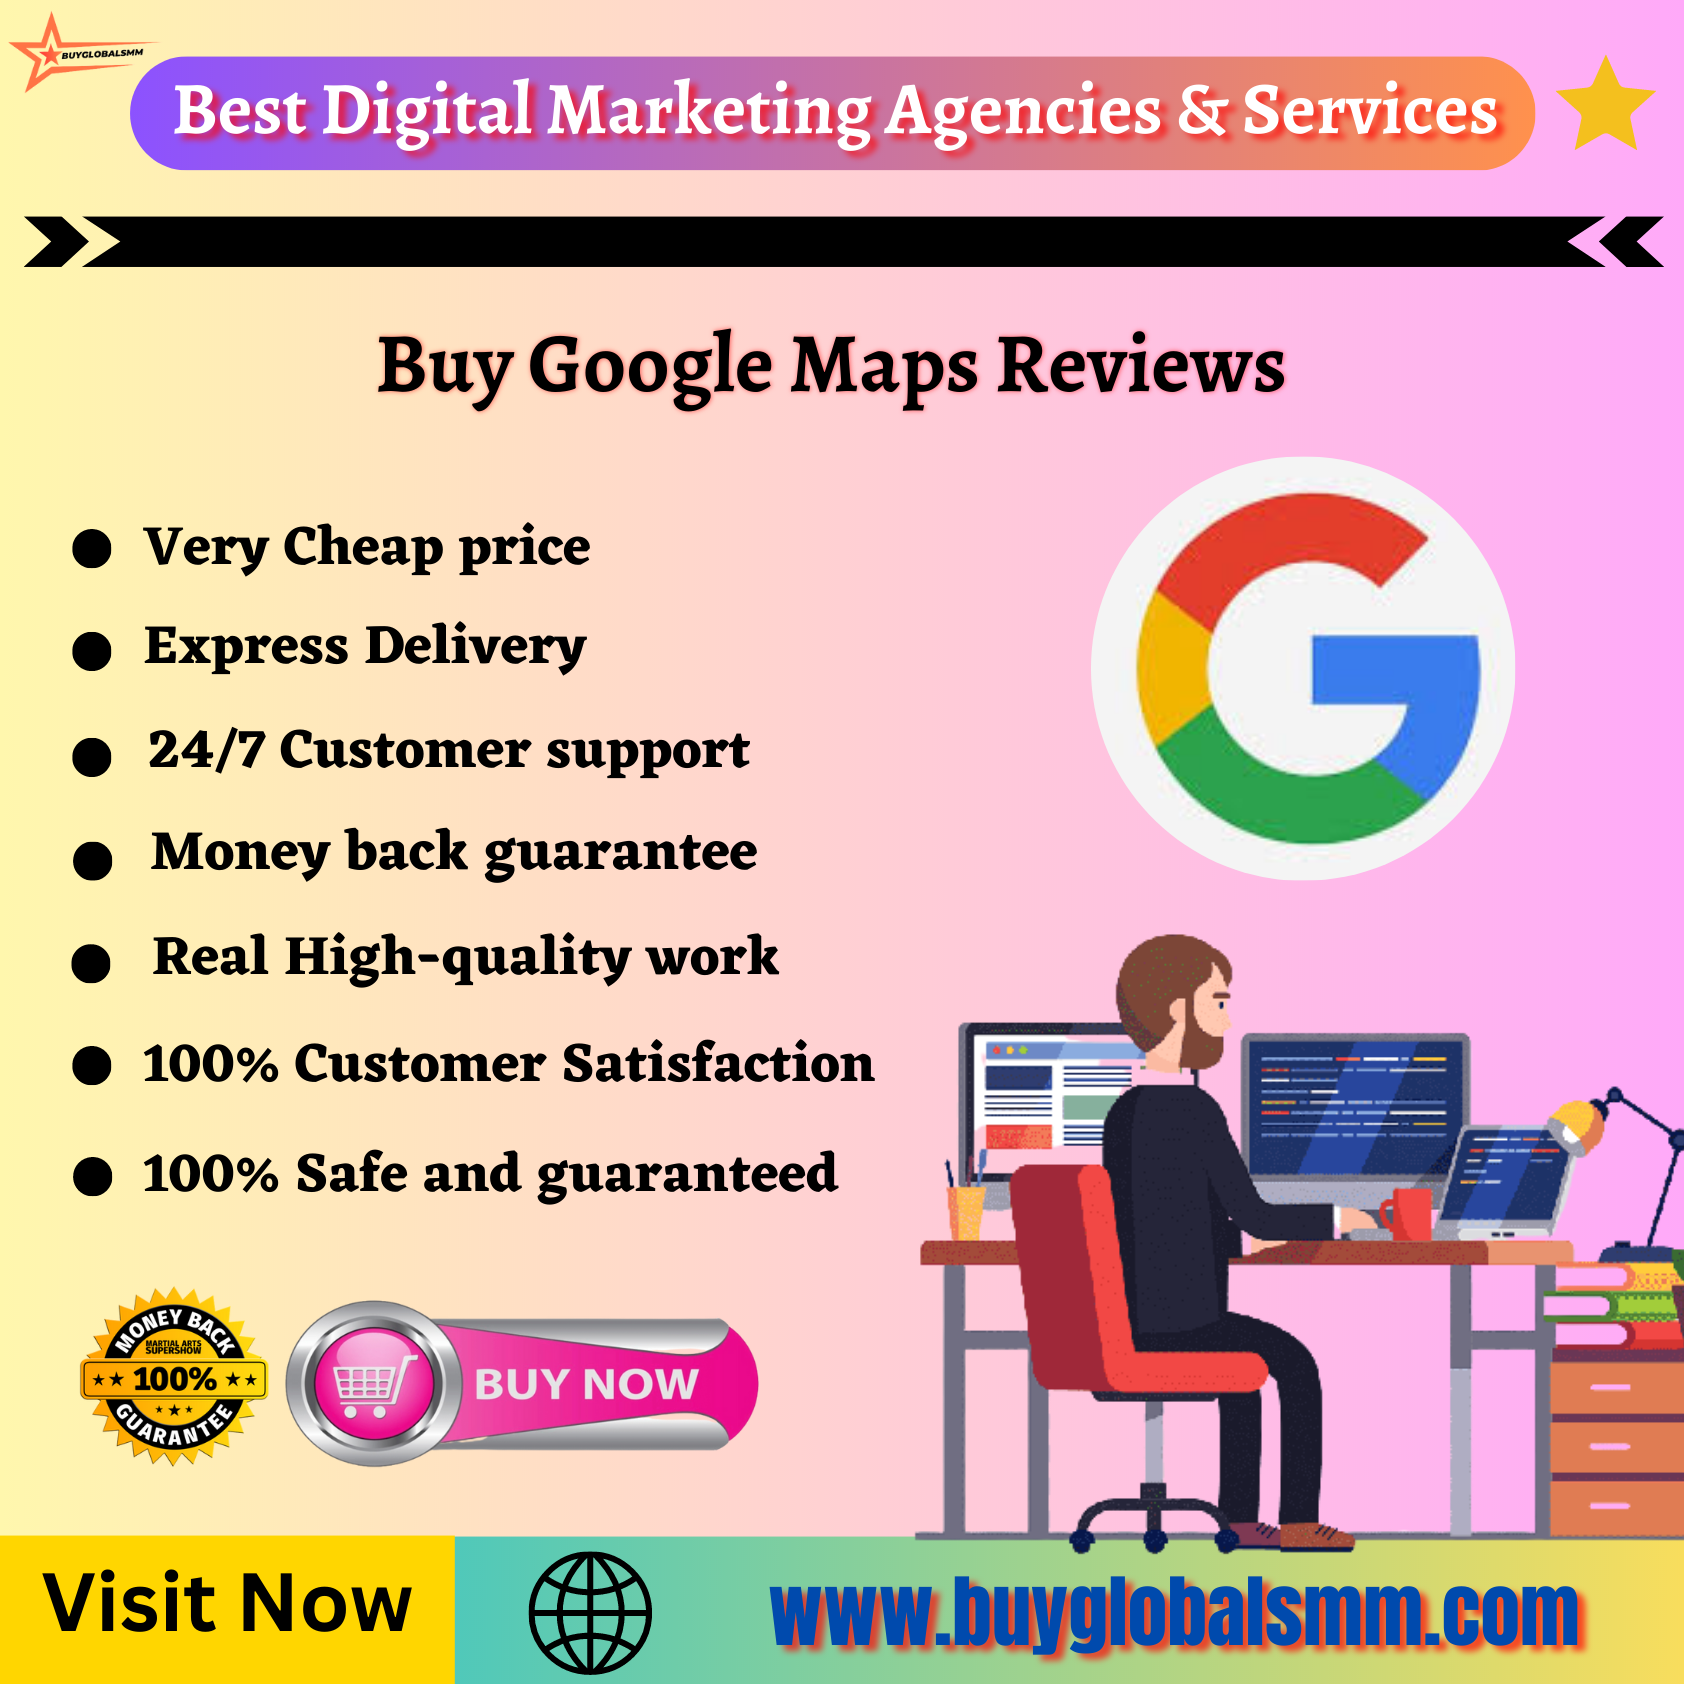 Buy Google Maps Reviews-100% trusted service, & cheap...